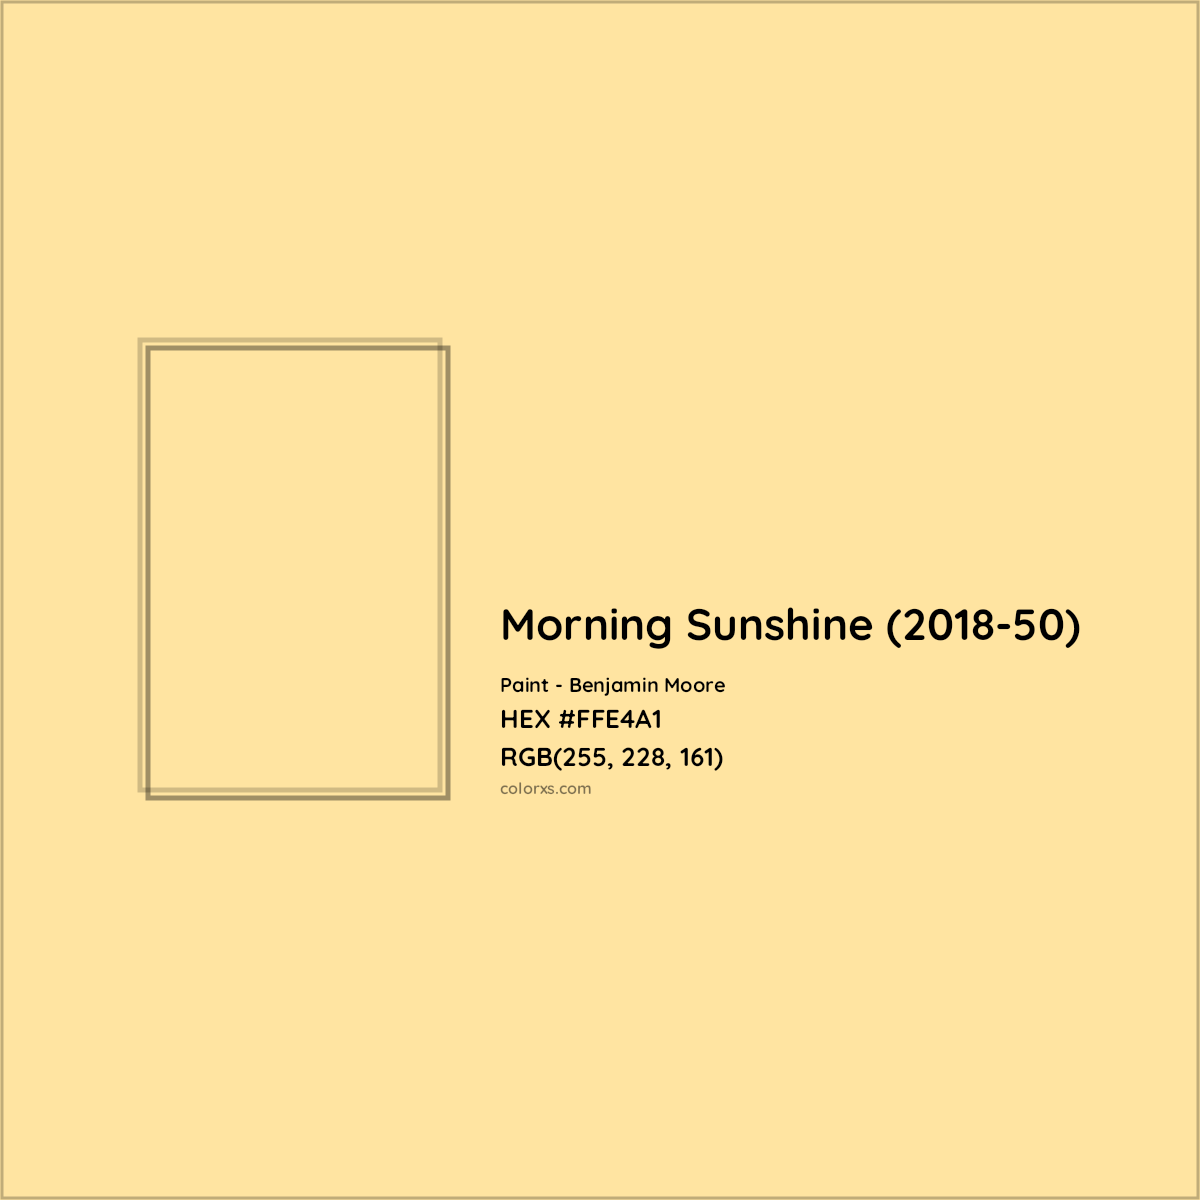 HEX #FFE4A1 Morning Sunshine (2018-50) Paint Benjamin Moore - Color Code